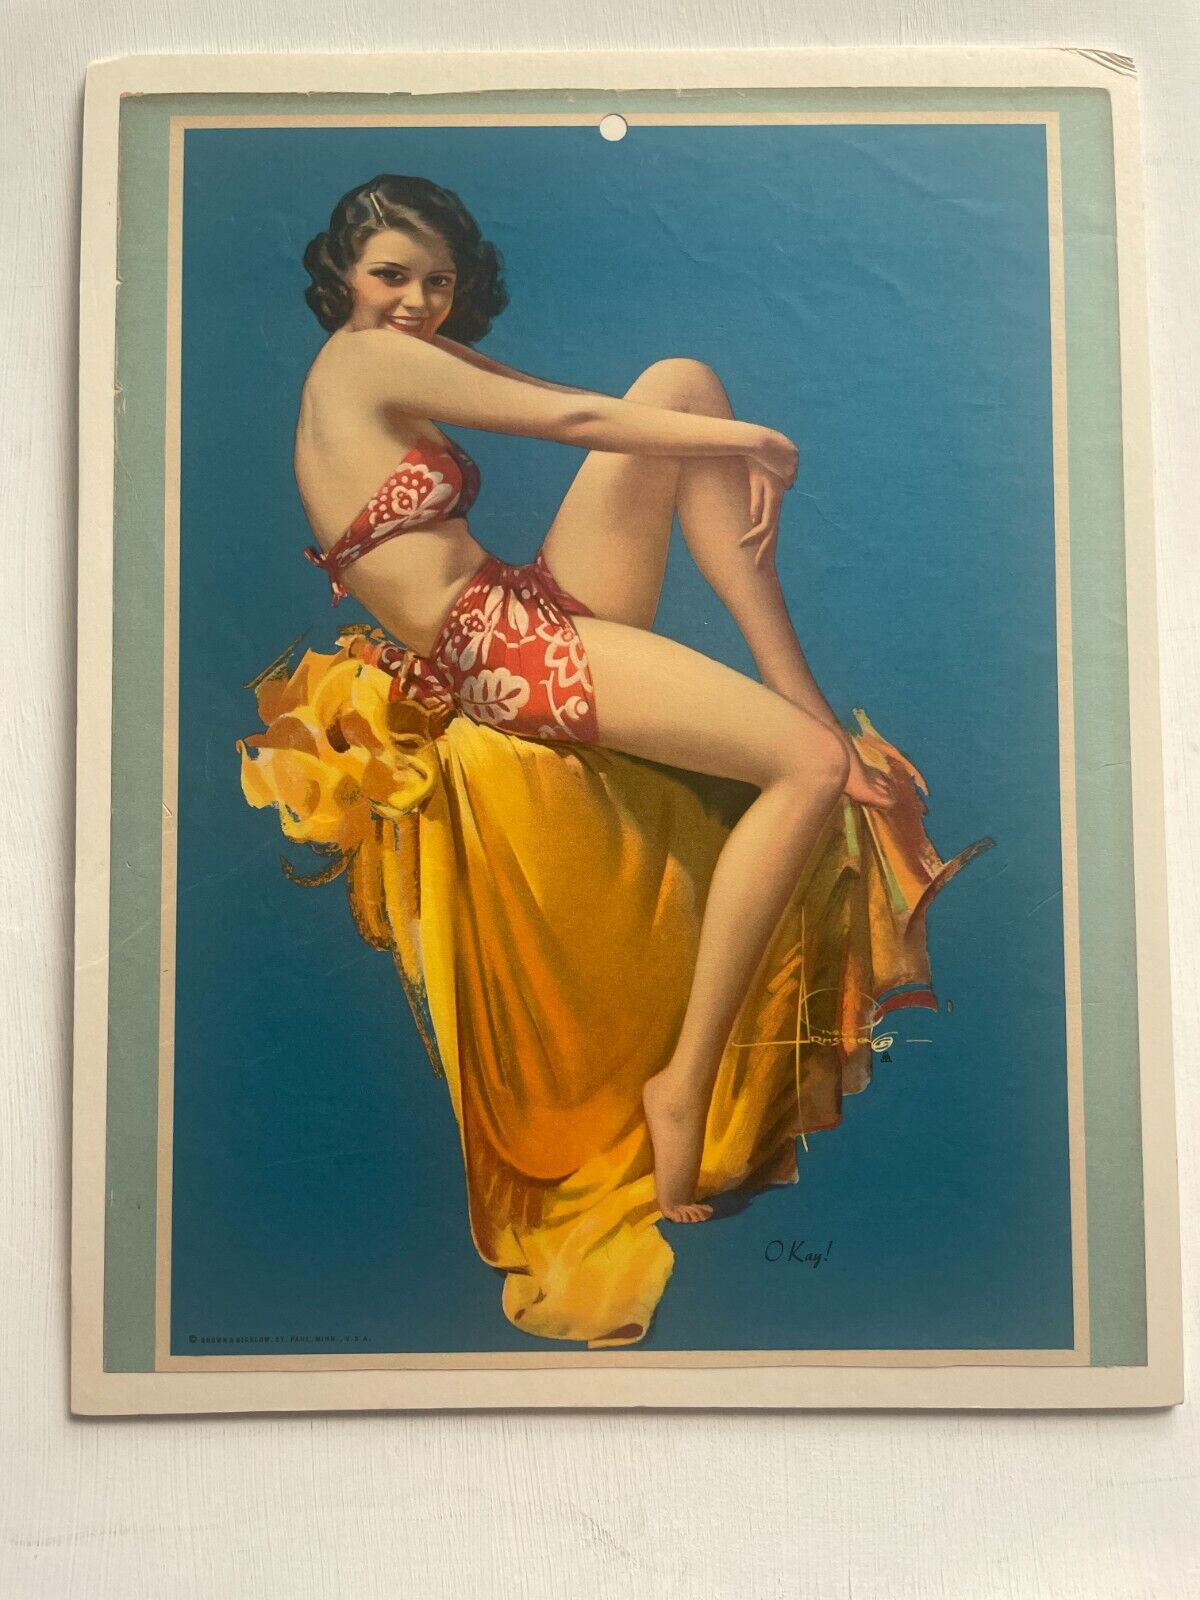 Vintage Pinup Girl Picture in Hawaii Wrap Skirt by Rolf Armstrong- O Kay